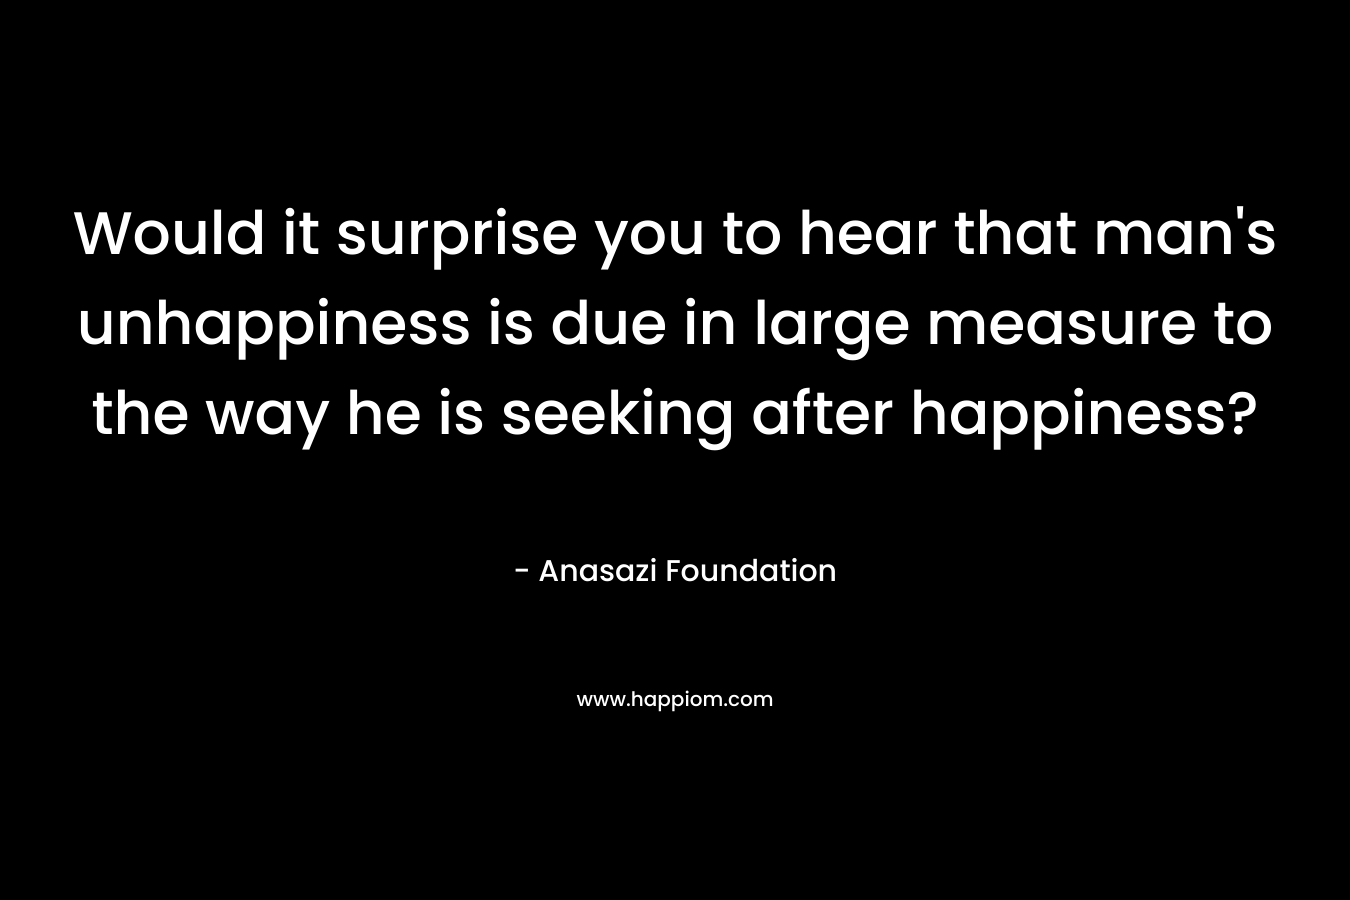 Would it surprise you to hear that man’s unhappiness is due in large measure to the way he is seeking after happiness? – Anasazi Foundation